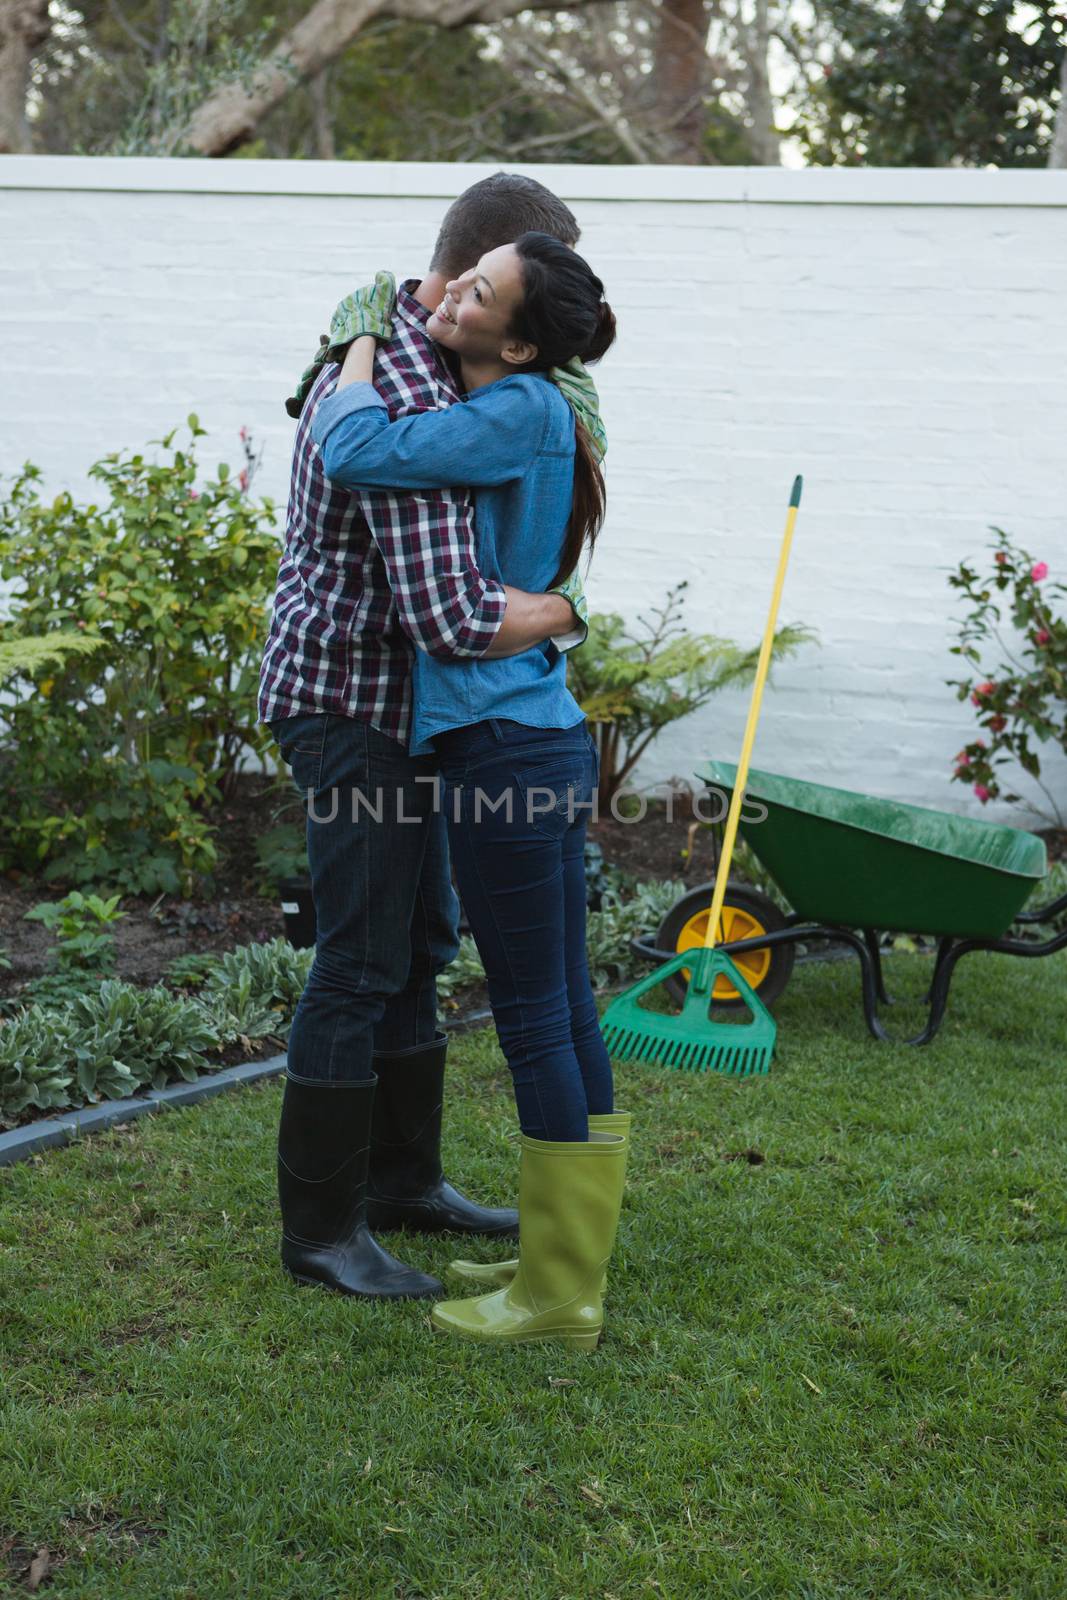 Romantic couple embracing each other in the garden